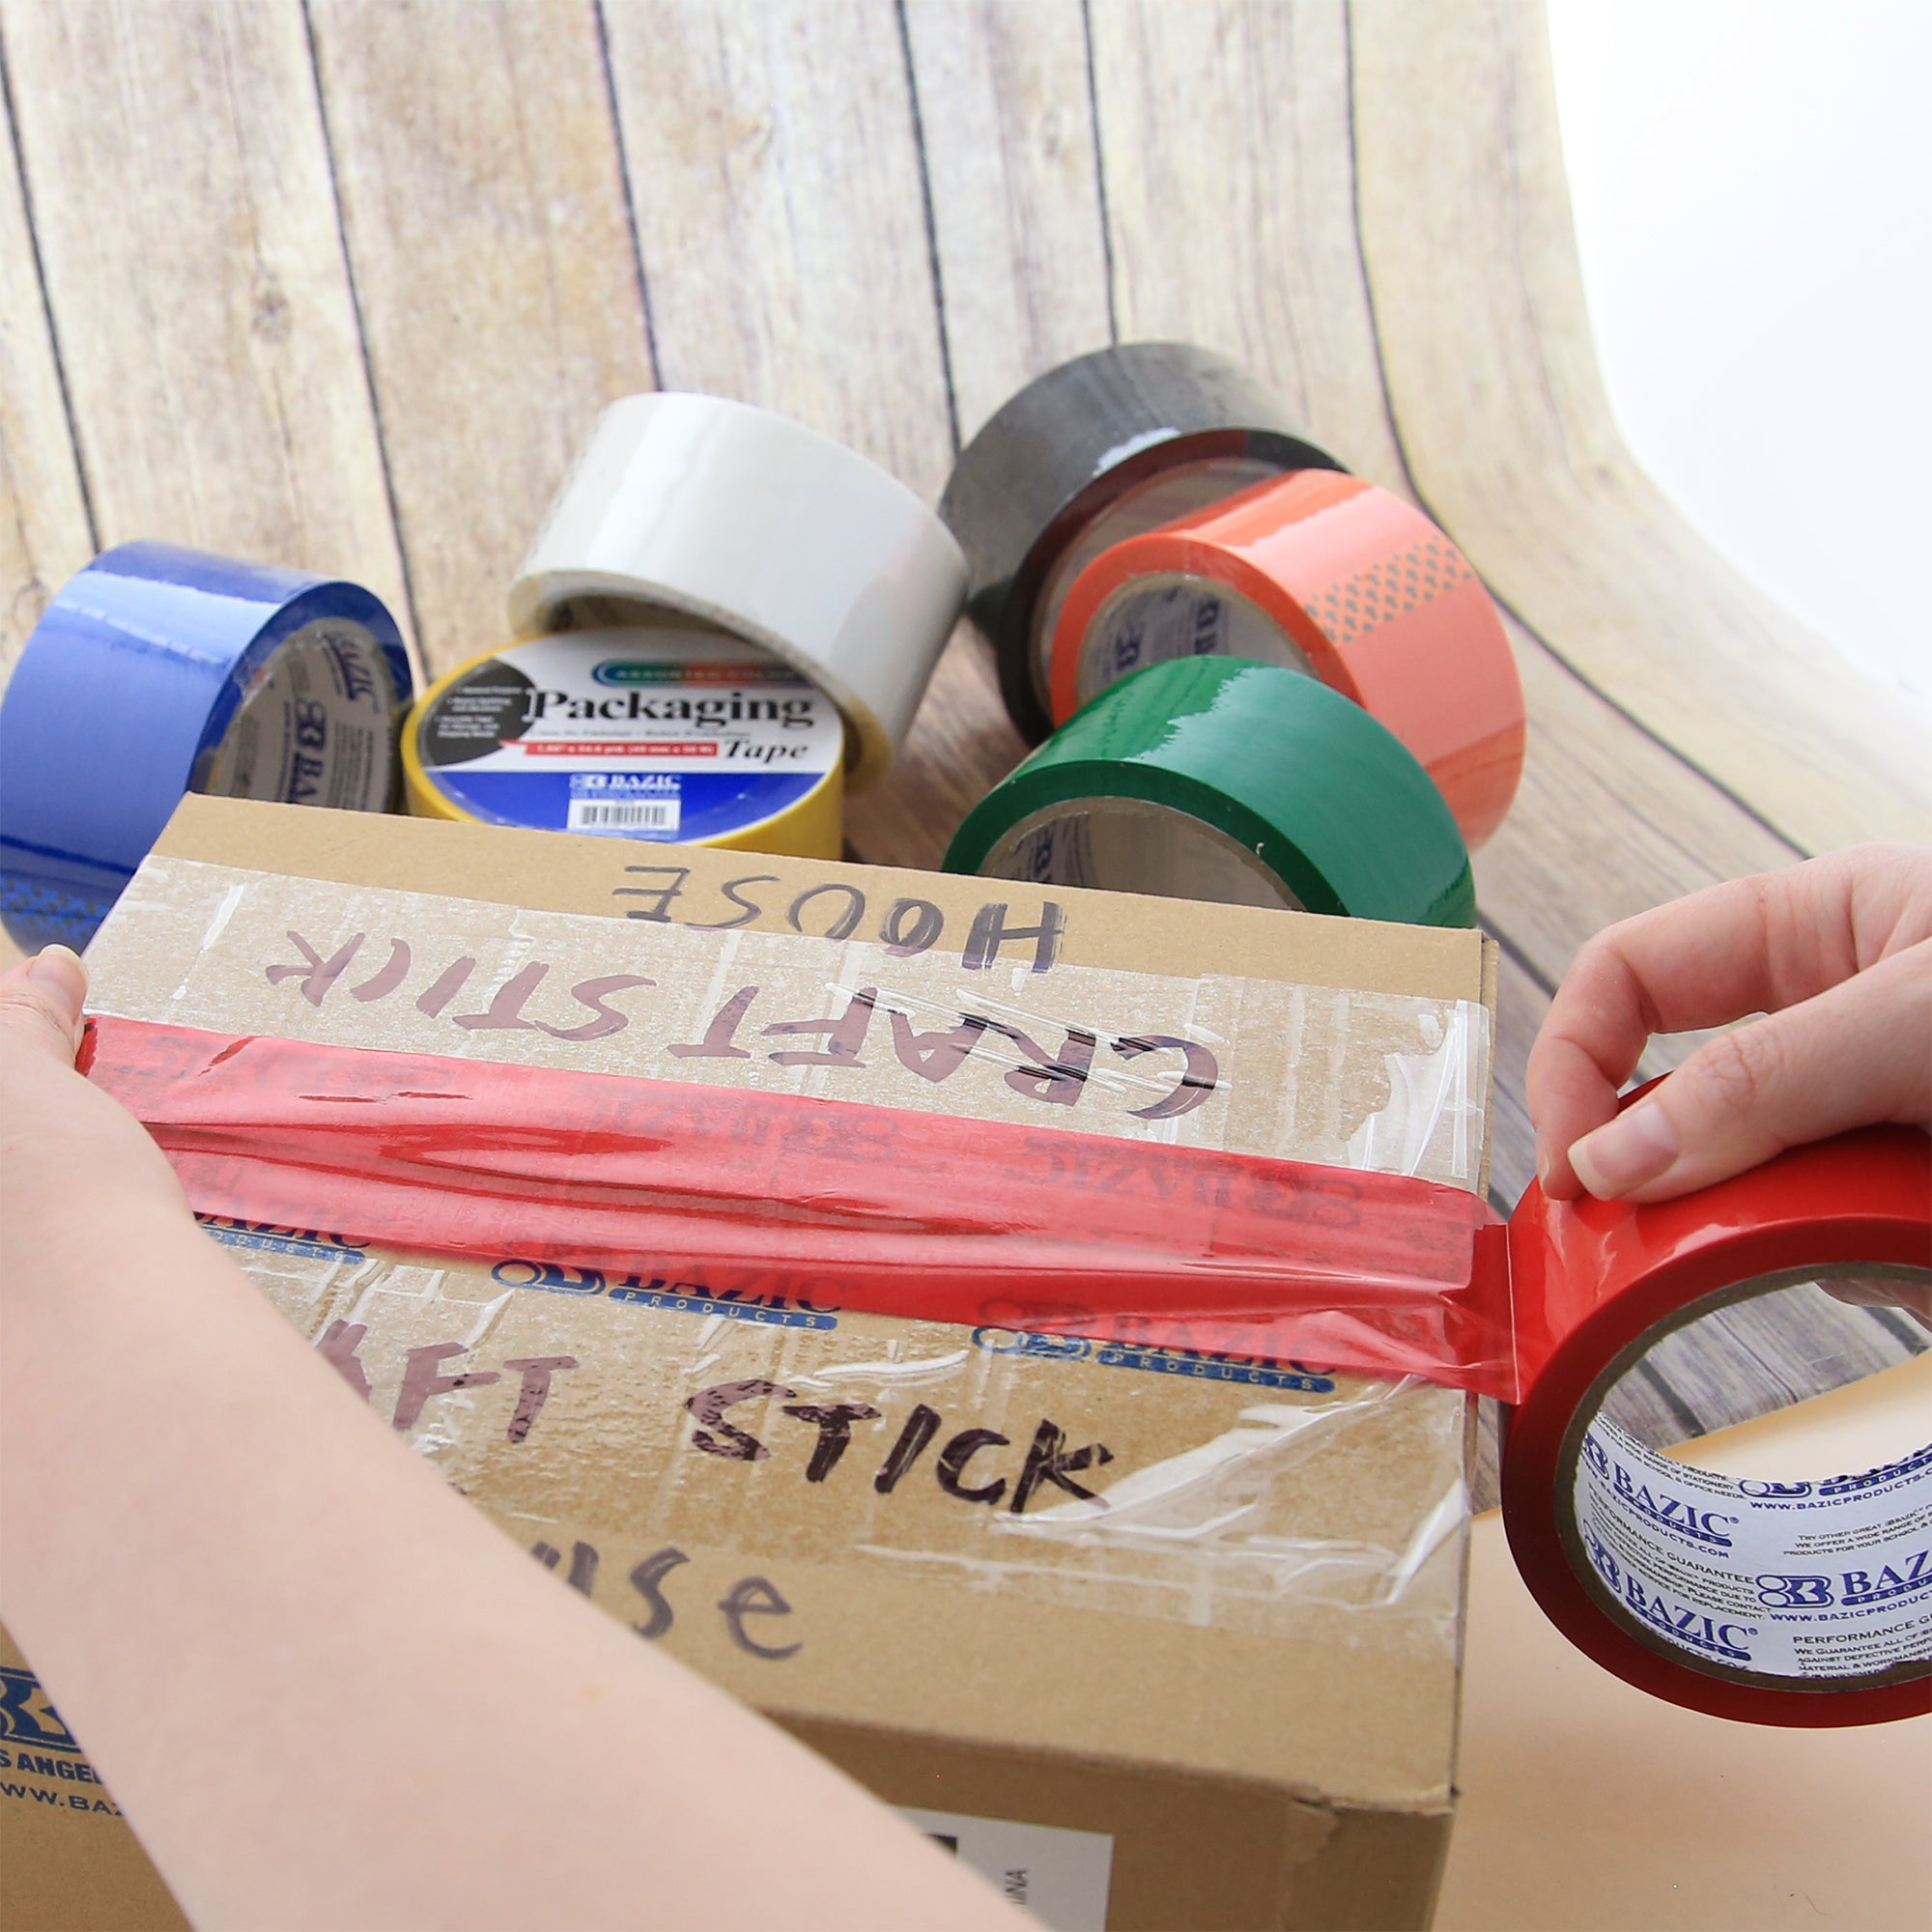 Huge deals on colored packing tape